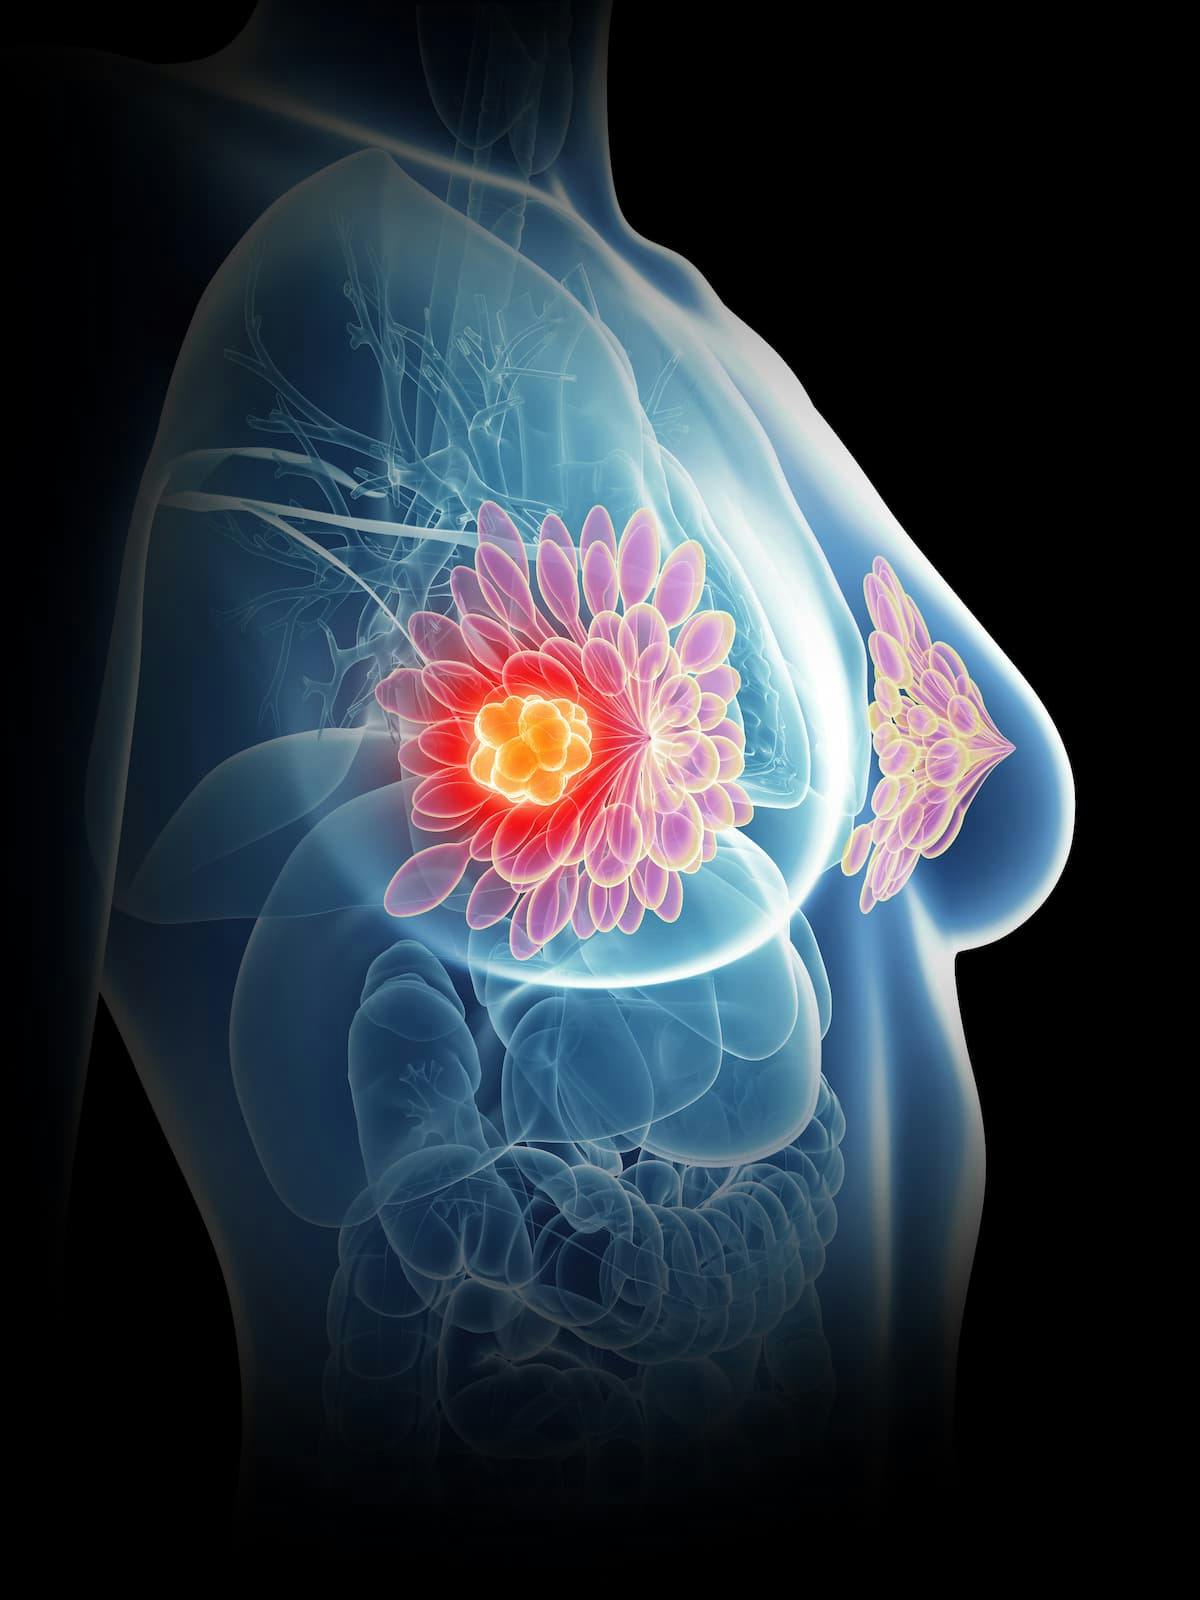 Adult patients with previously treated unresectable or metastatic HER2-positive breast cancer in China can now receive treatment with trastuzumab deruxtecan.